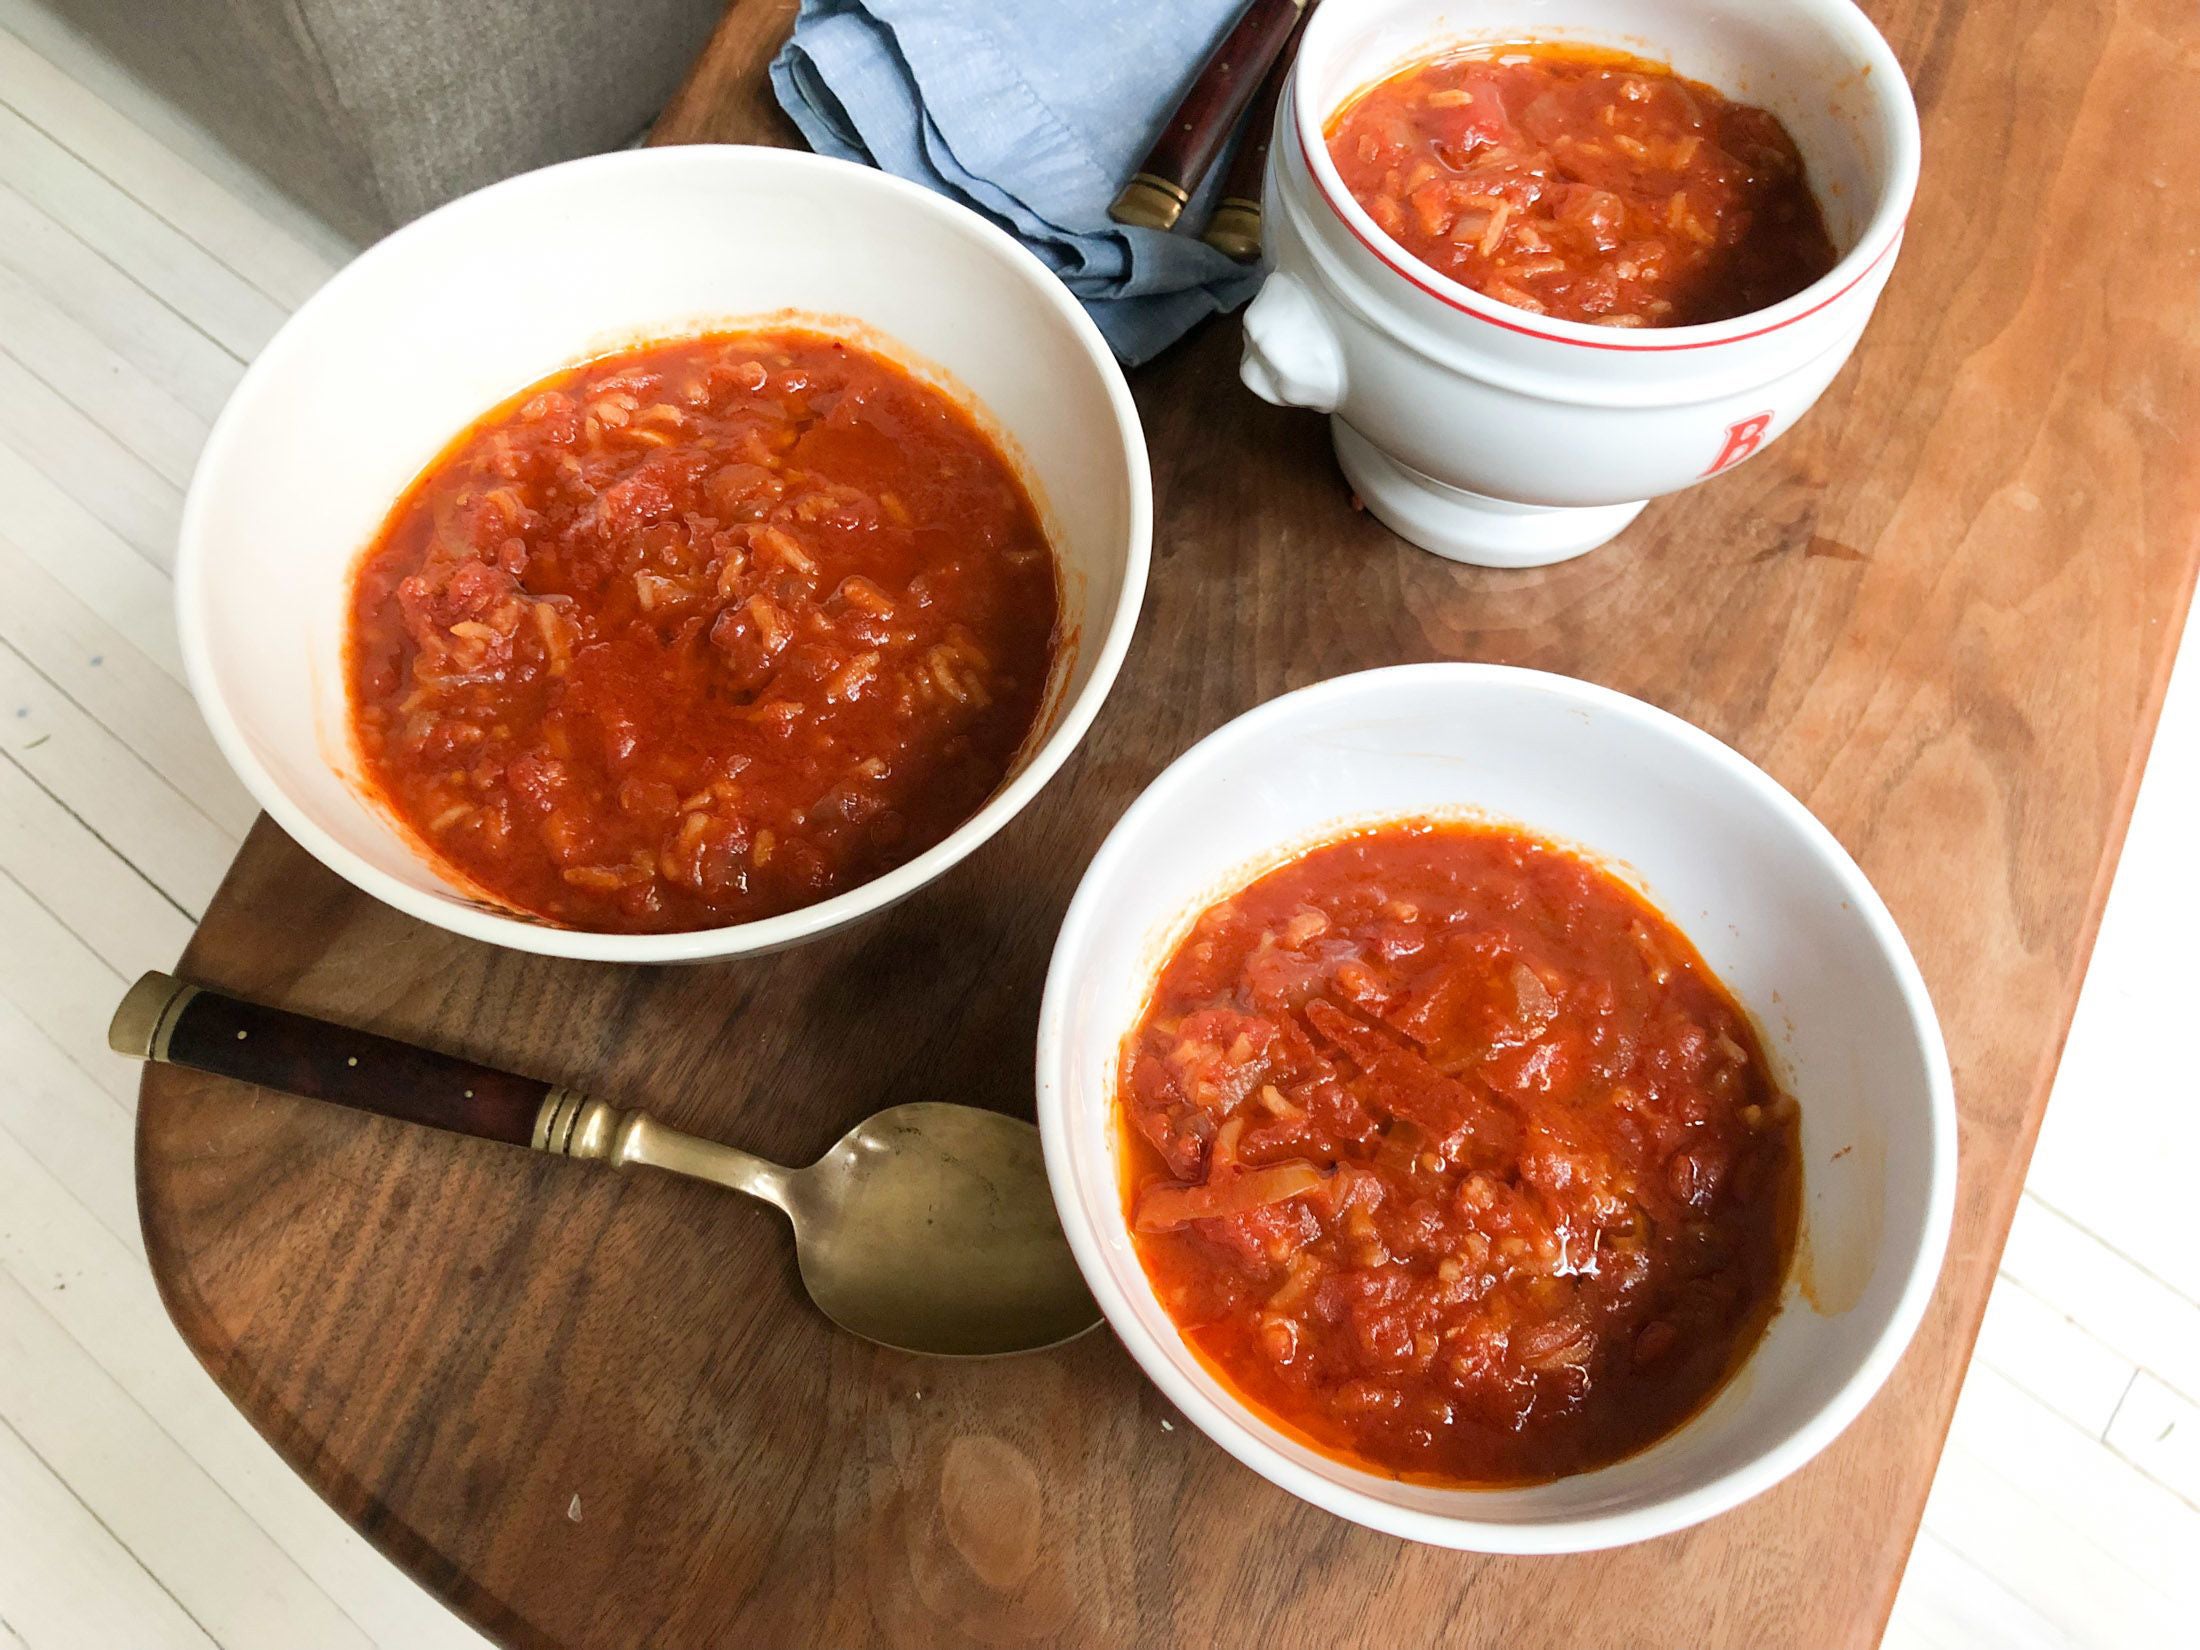 The flavour of this tomato soup with rice is extra rich thanks to caramelised tomato paste